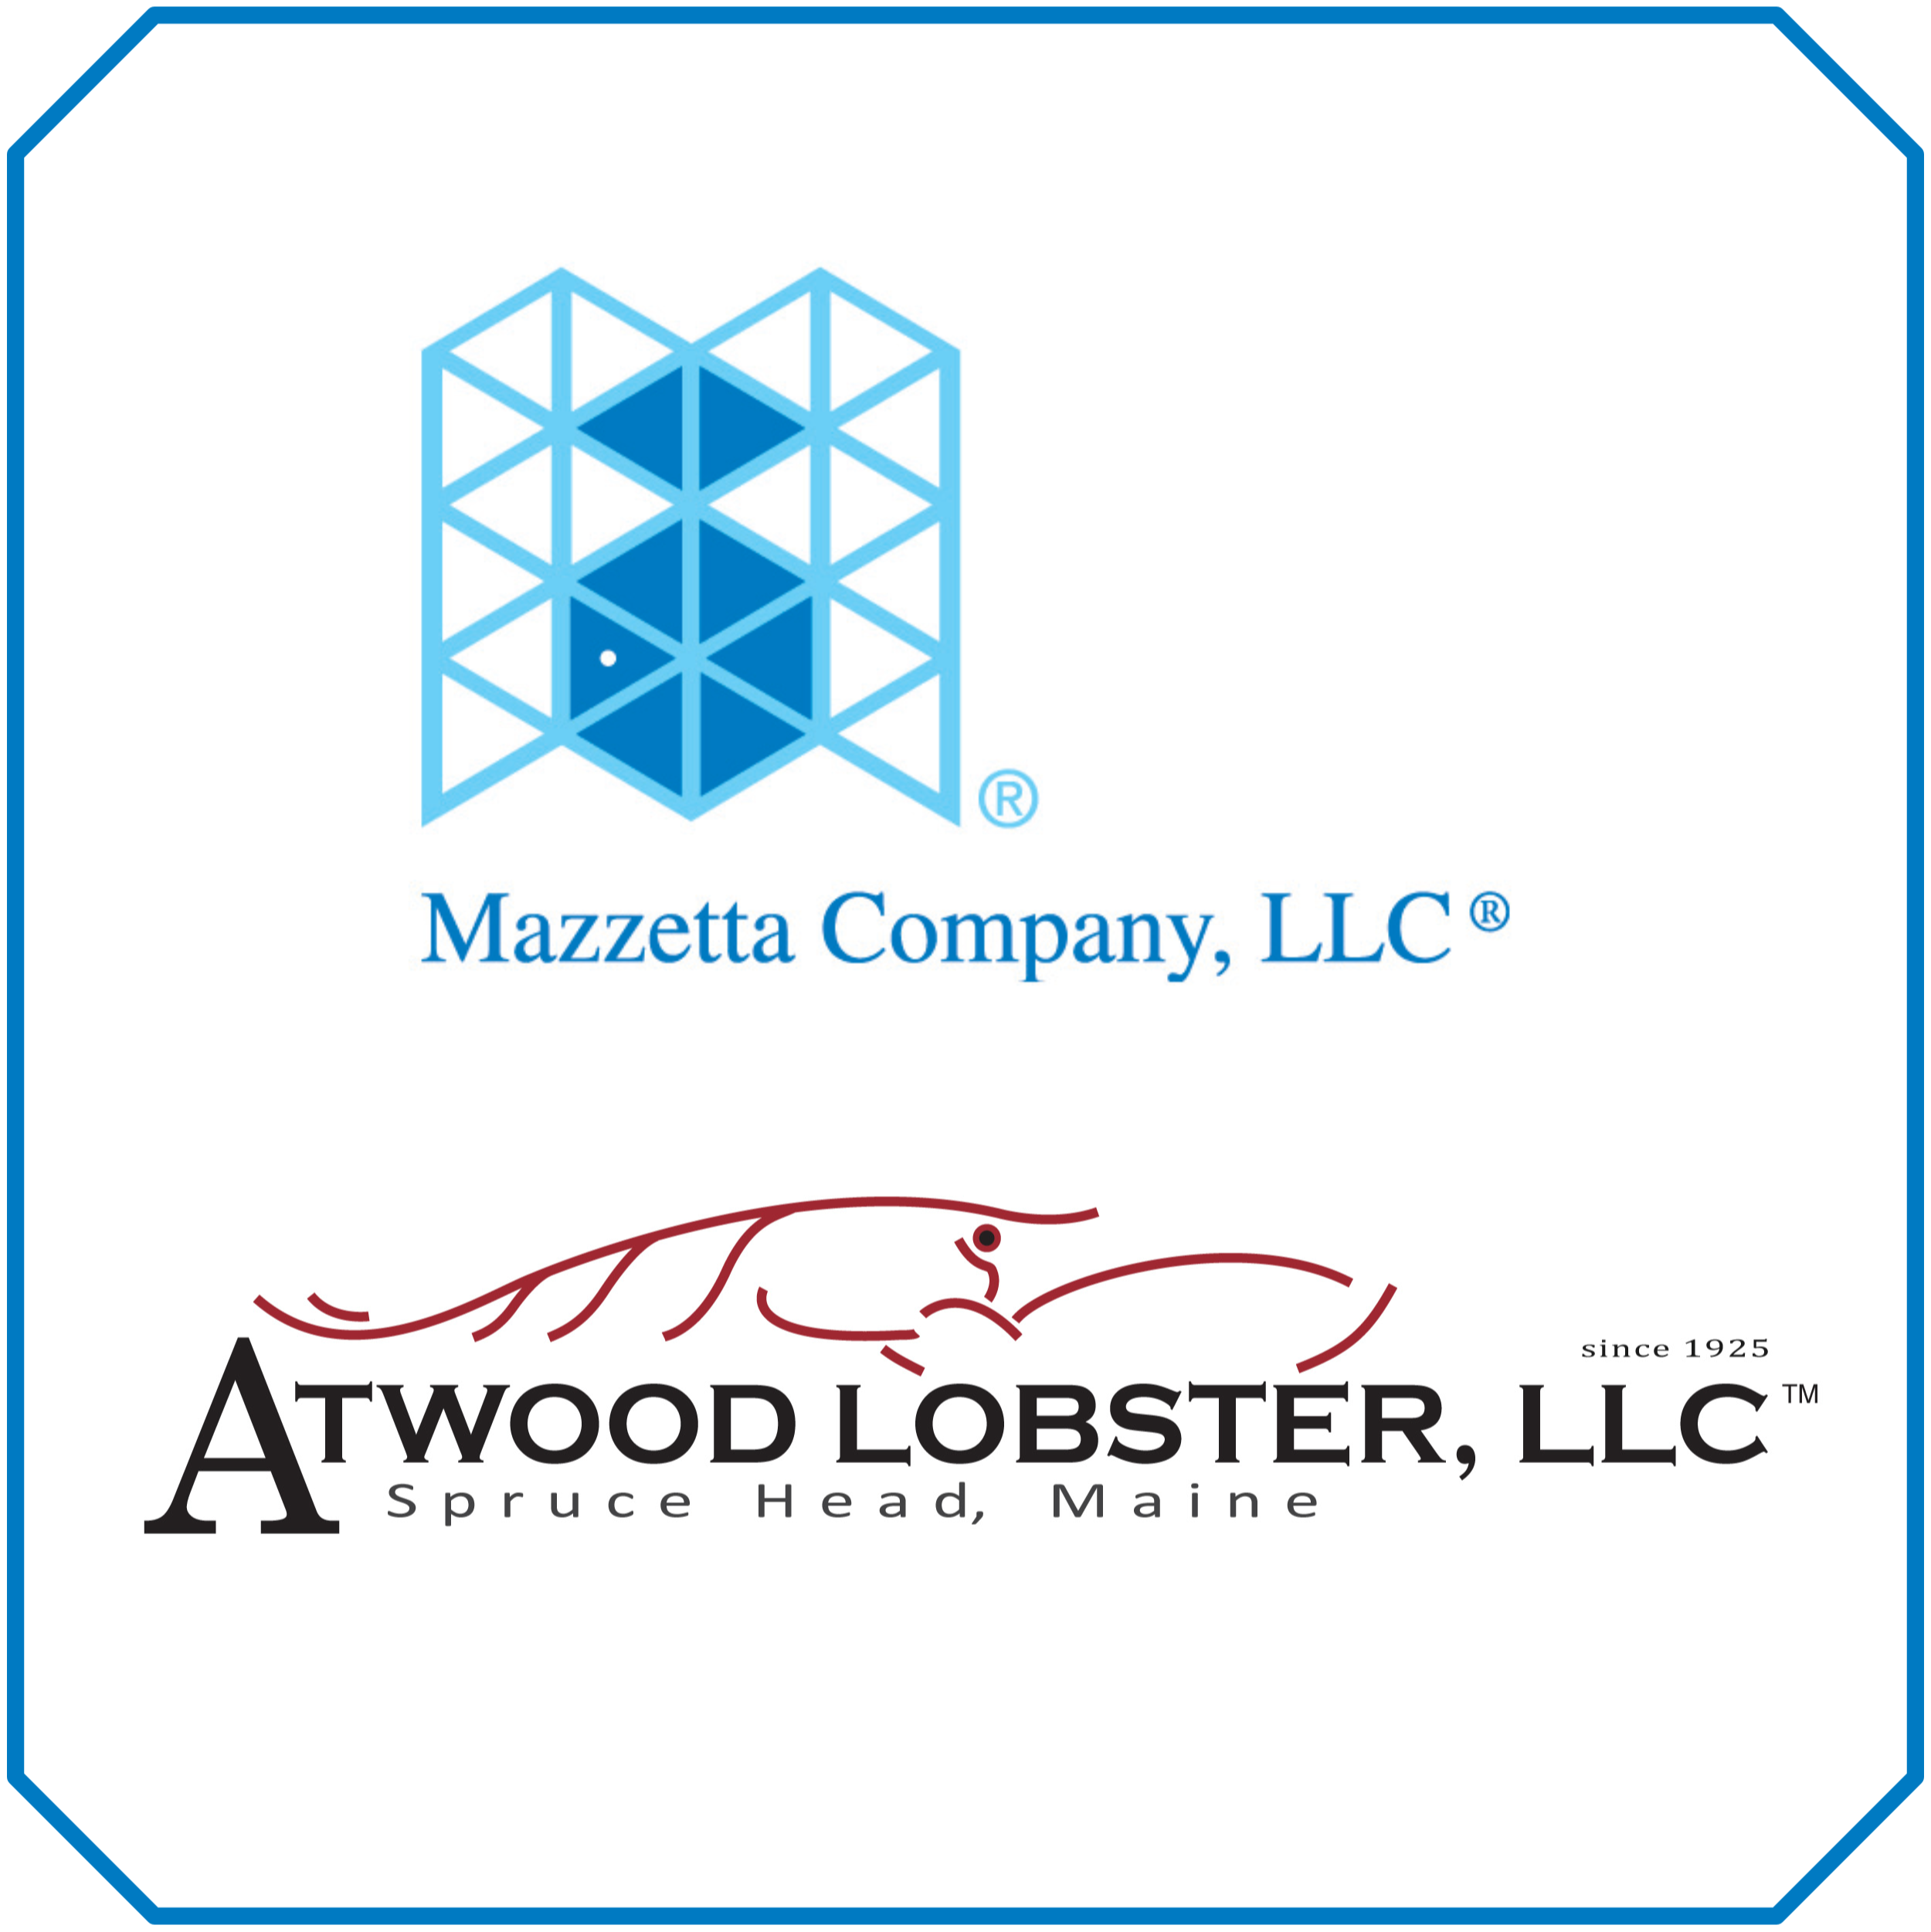 Mazzetta Company and Atwood Lobster Logos